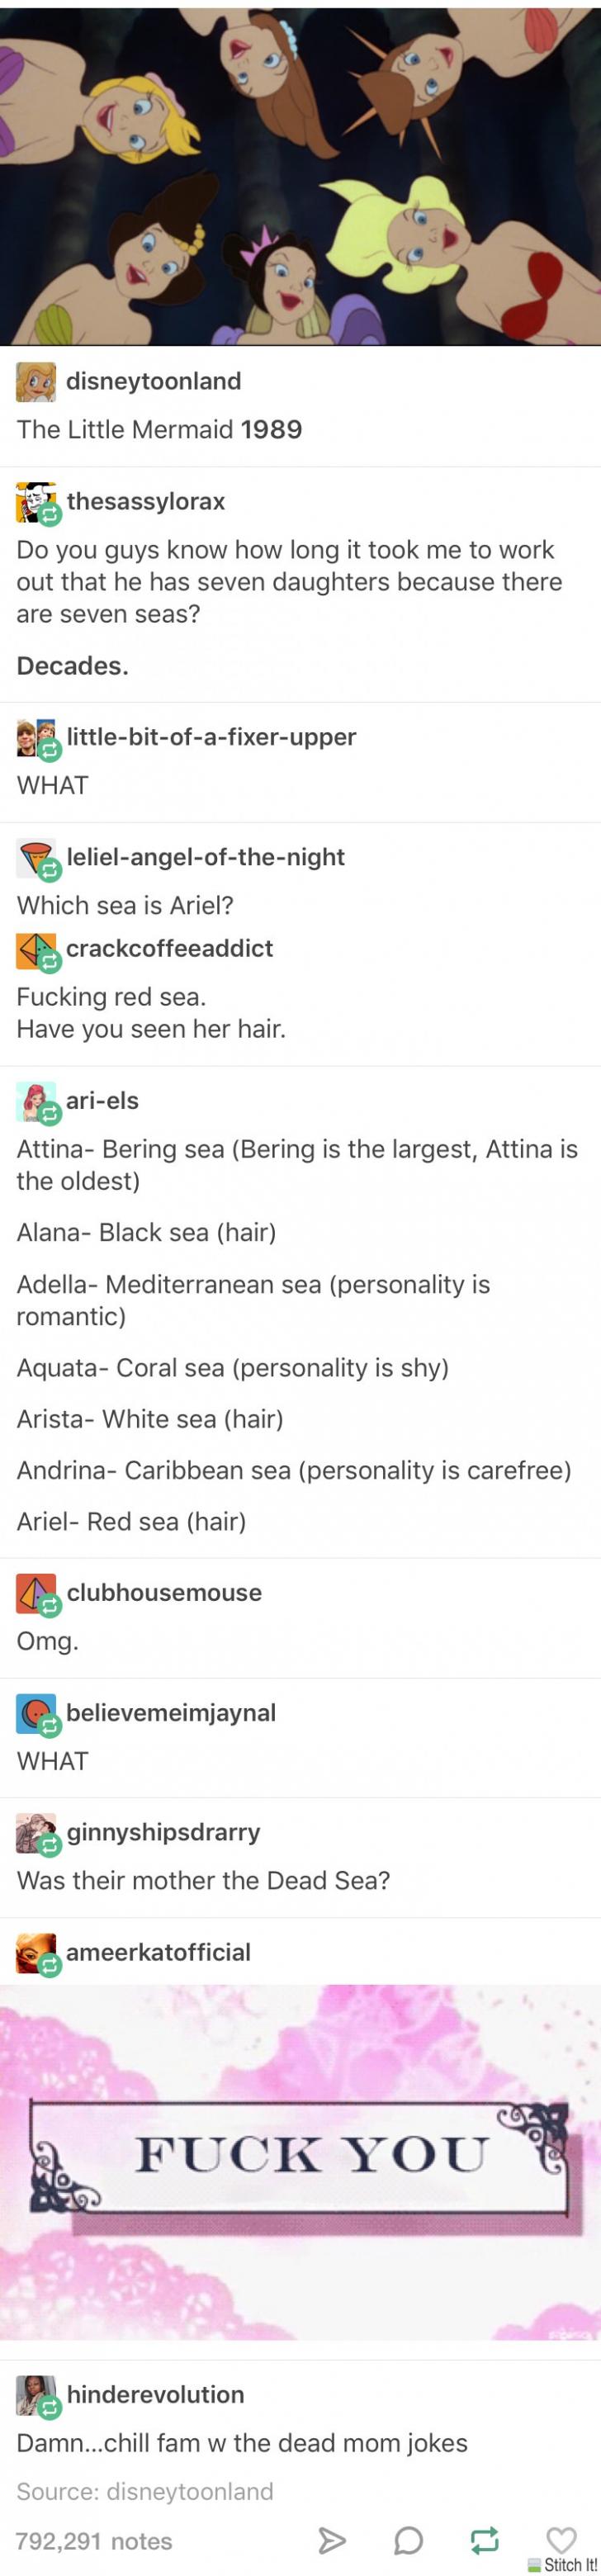 This changes everything I ever knew about The Little Mermaid...